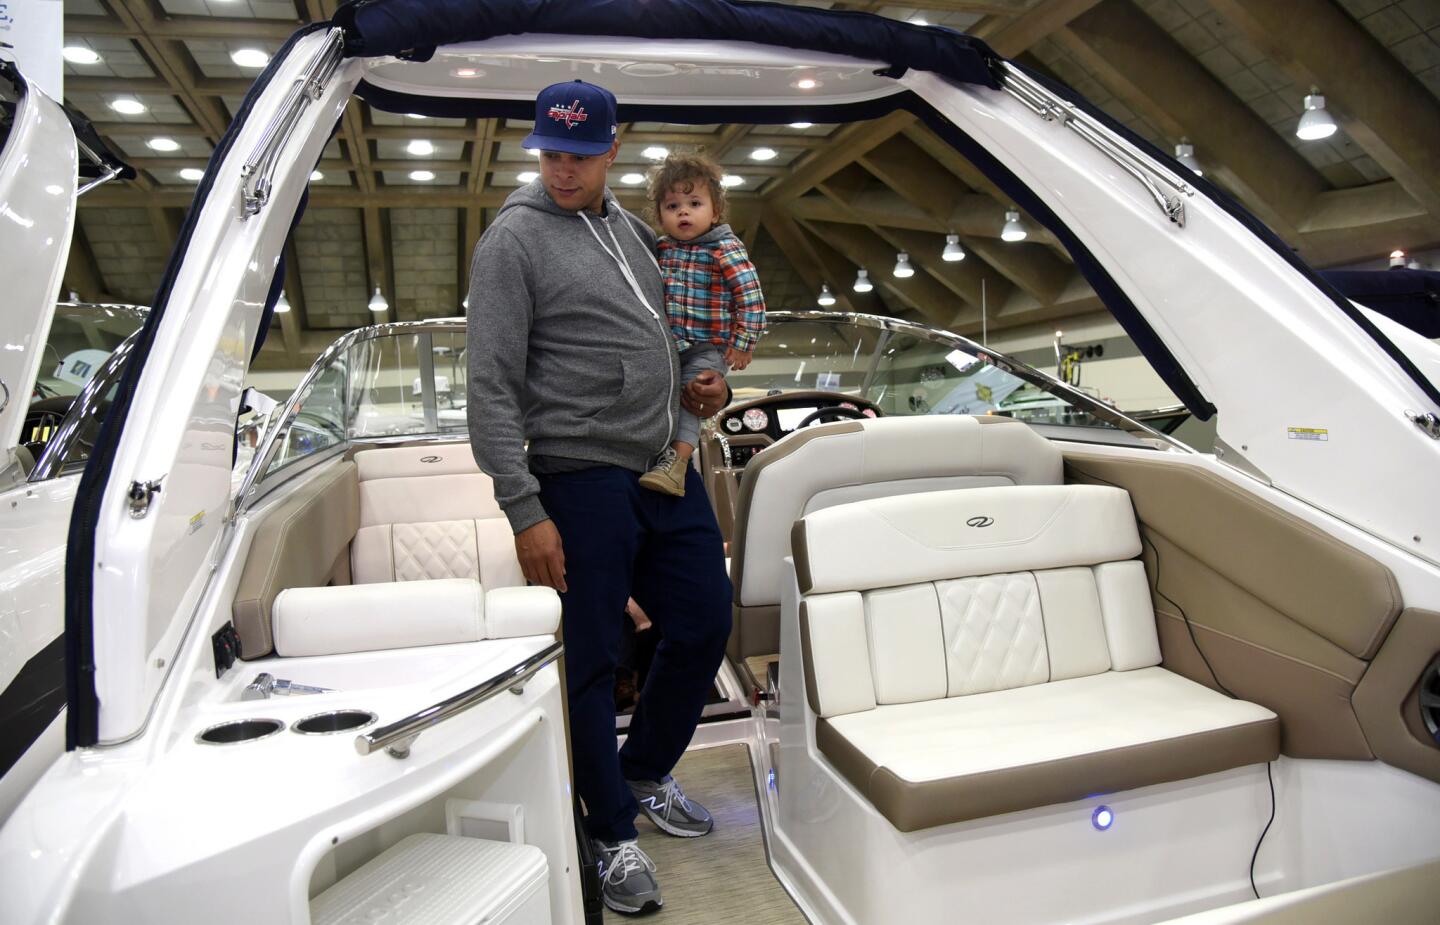 Jason Lallis of Washington DC holds his 16 month old son Jordan Lallis as they look at a Regal Express cruiser at the Baltimore Boat Show, which is being held this weekend at the Baltimore Convention Center.